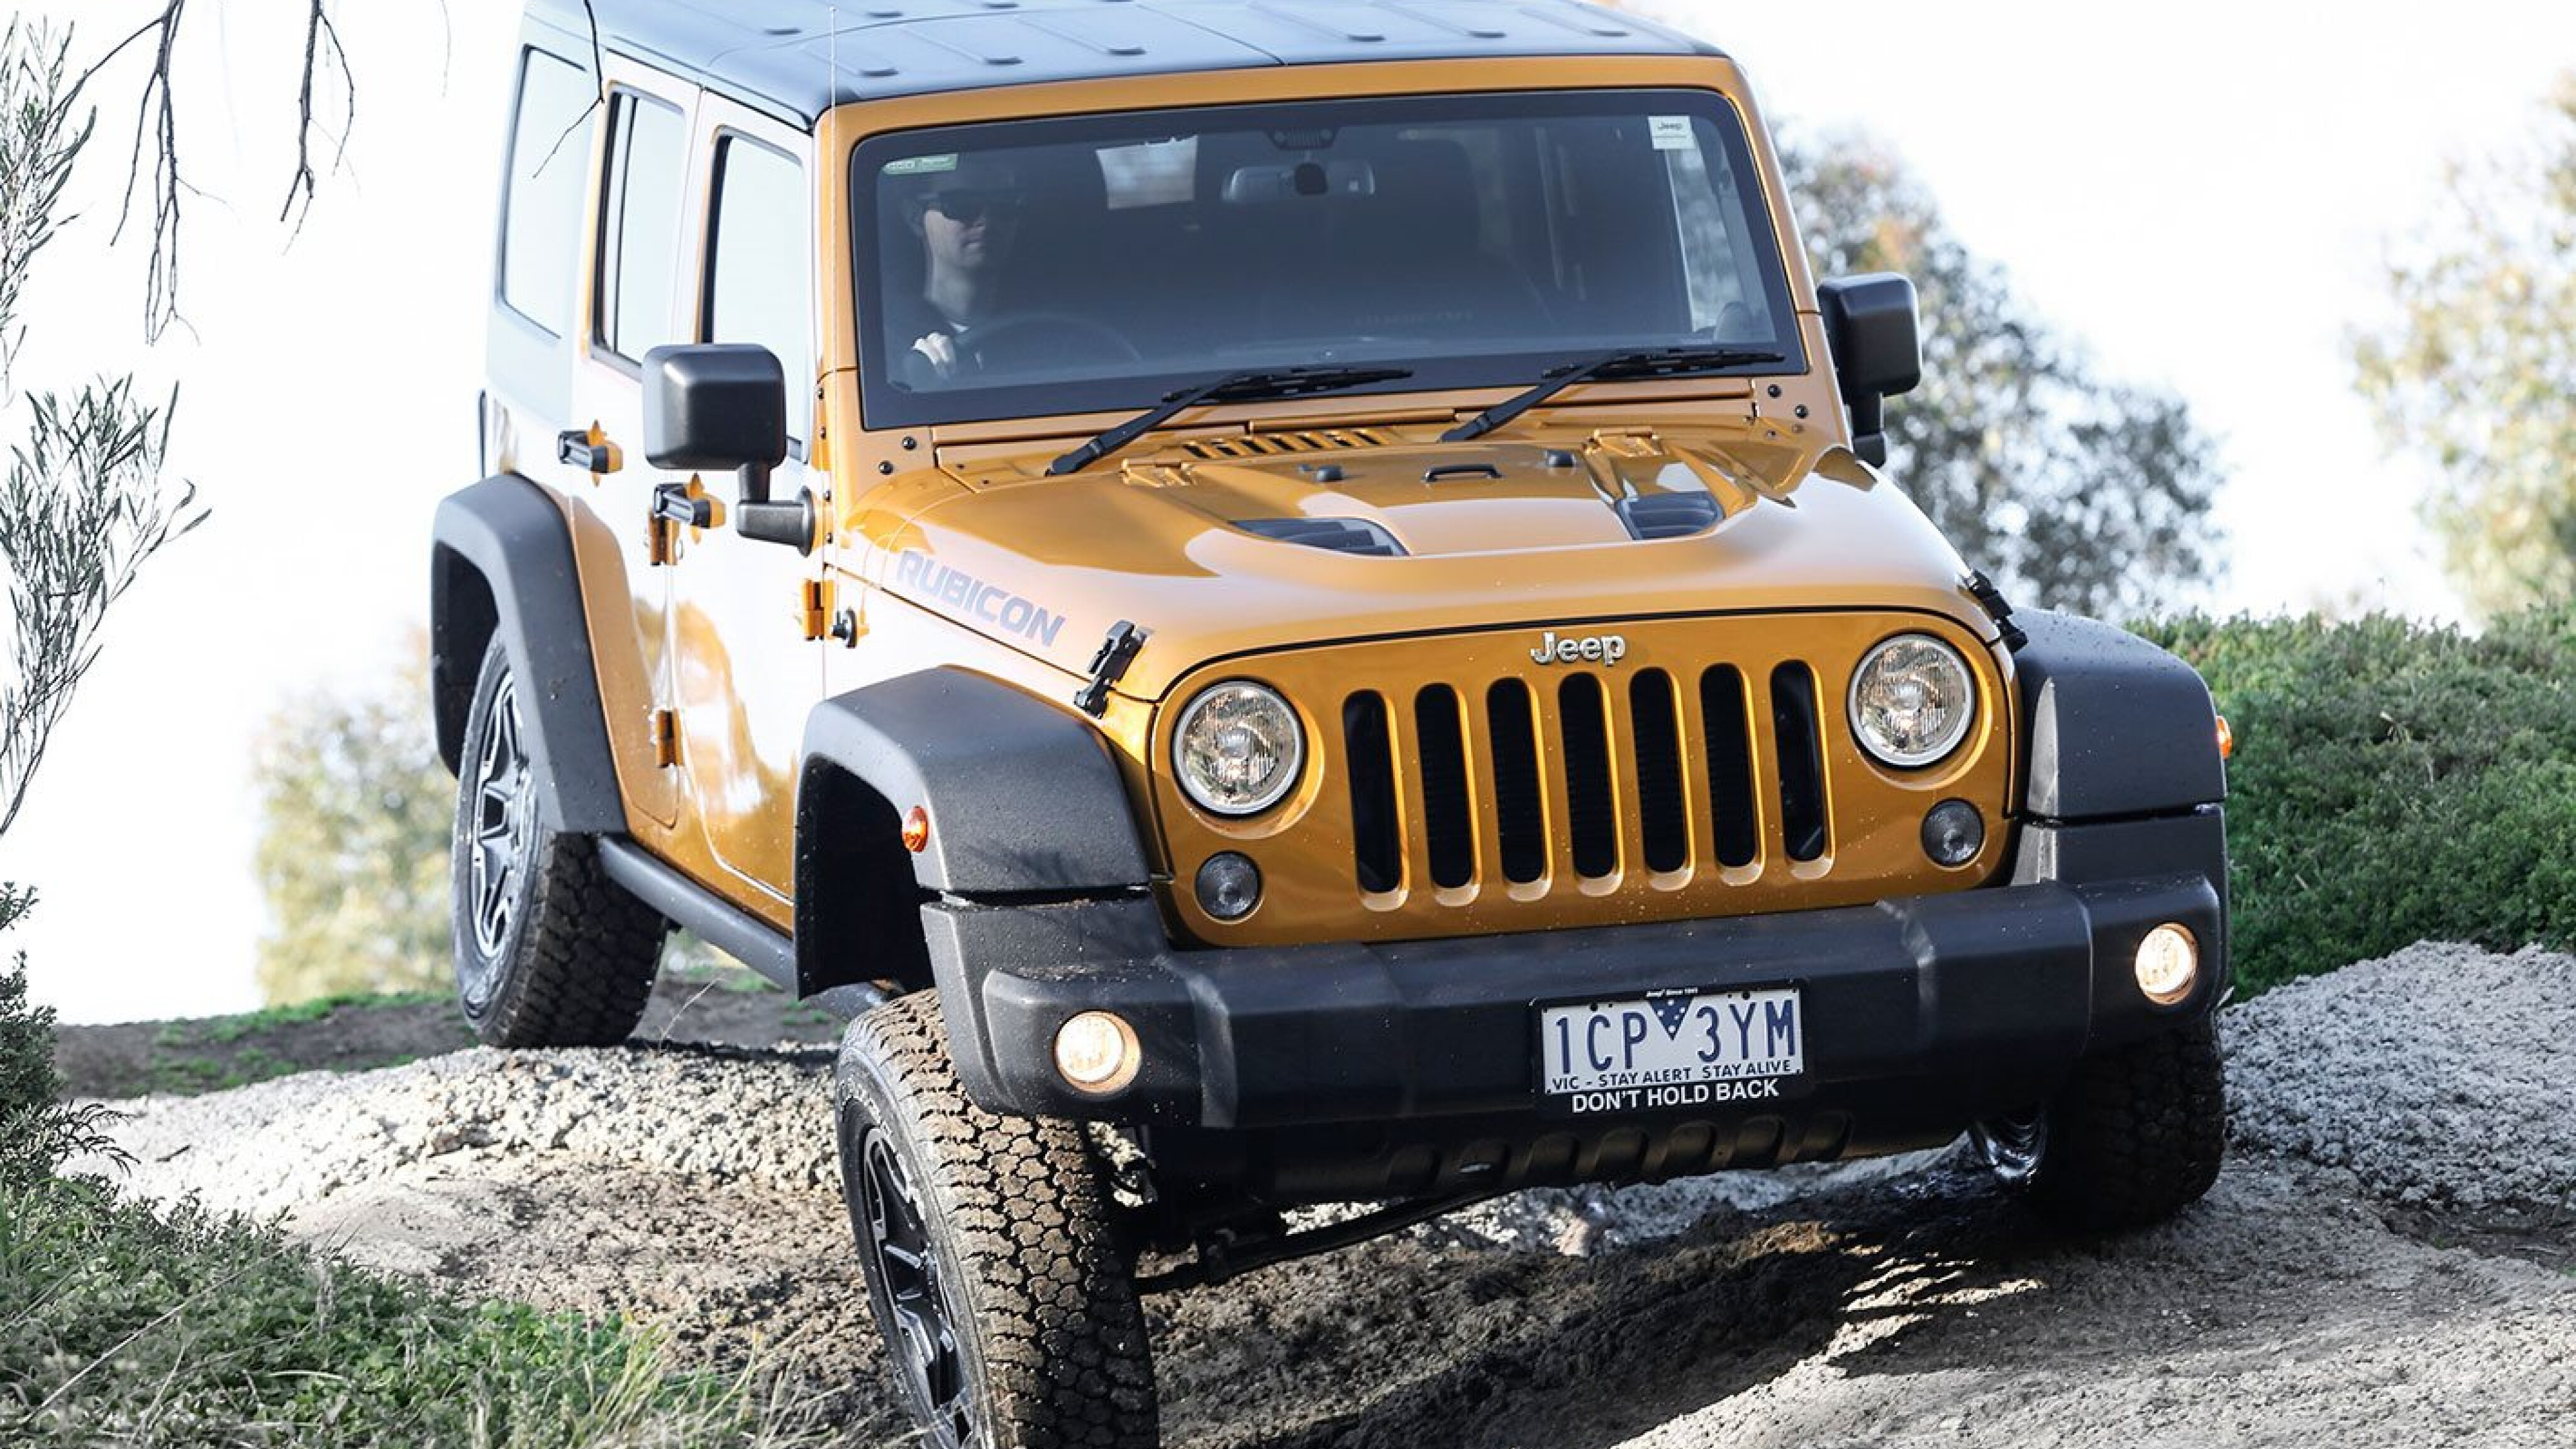 Jeep Wrangler JK (2007 - 2018) used car review, Car review